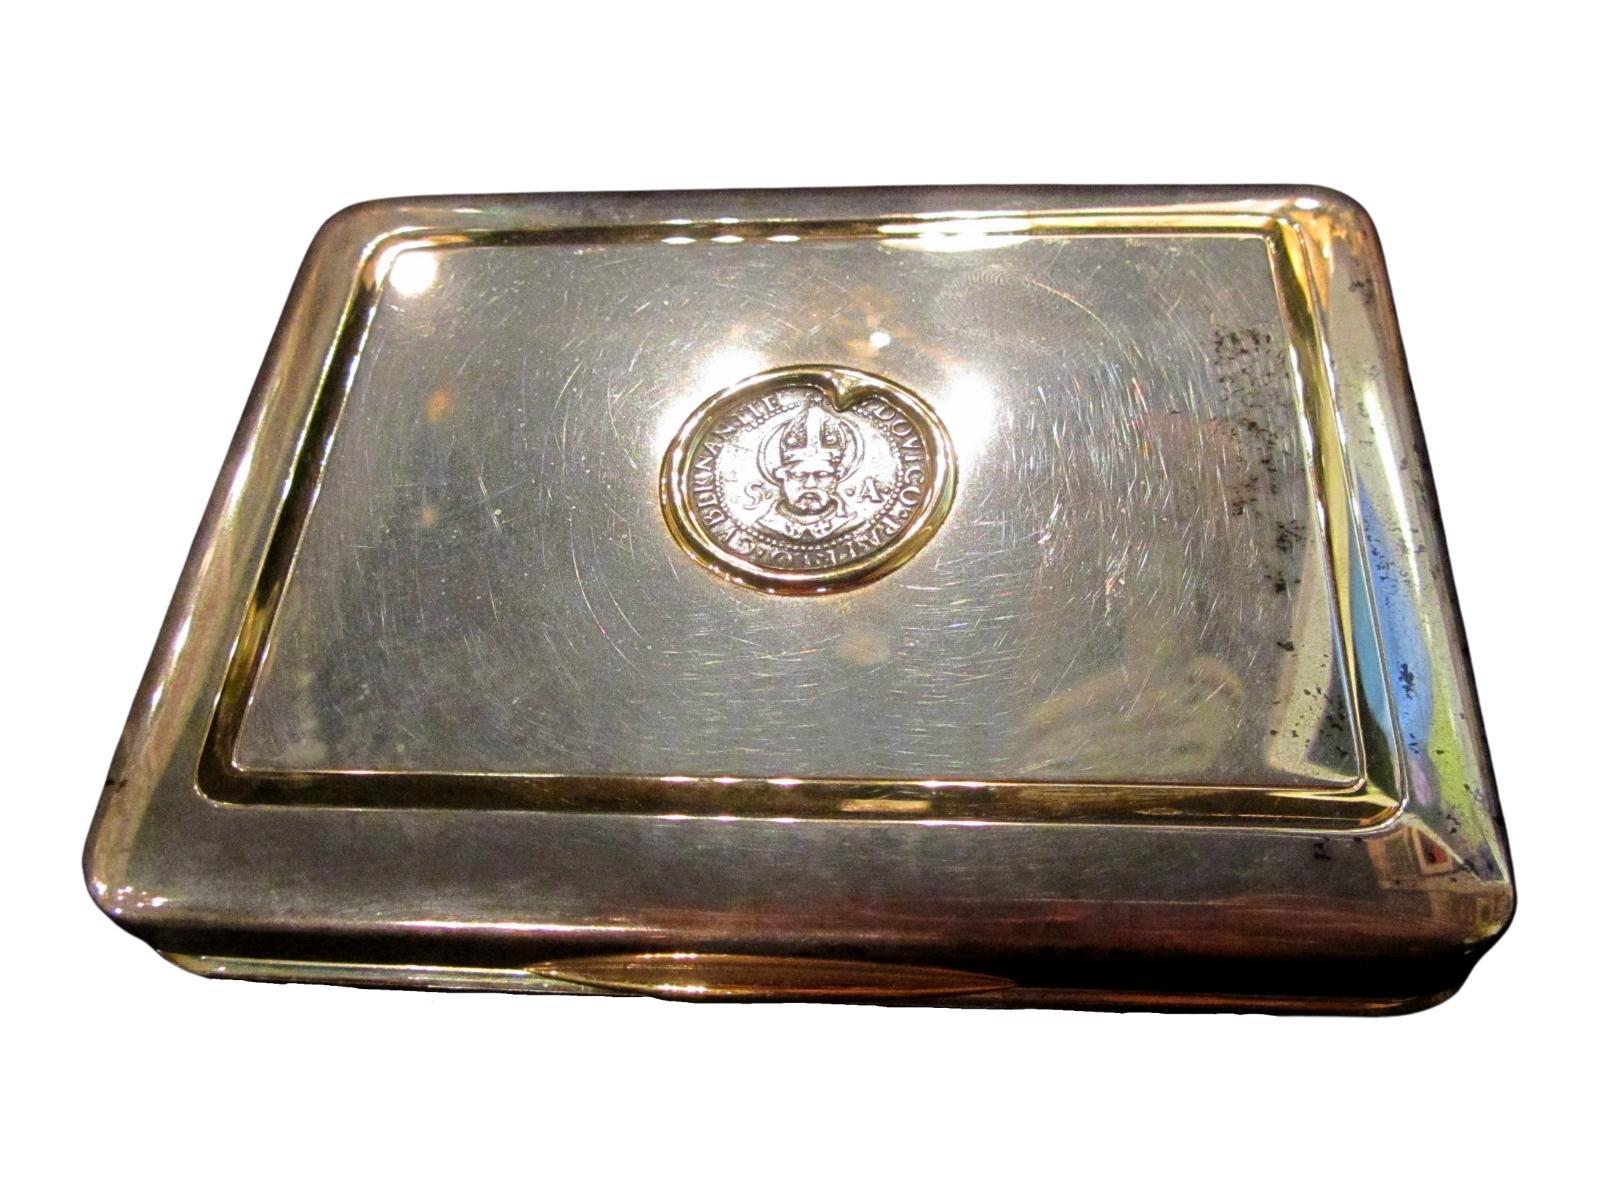 Rectangular sterling silver box.
The hinged cover is framed with a gold band, gold thumb piece
Inset with a Milan «Grosso 5 solid» silver coin within a gold circlet

Period: Giovanni Galeazzo Maria Sforza and his uncle and regent Ludovico Maria